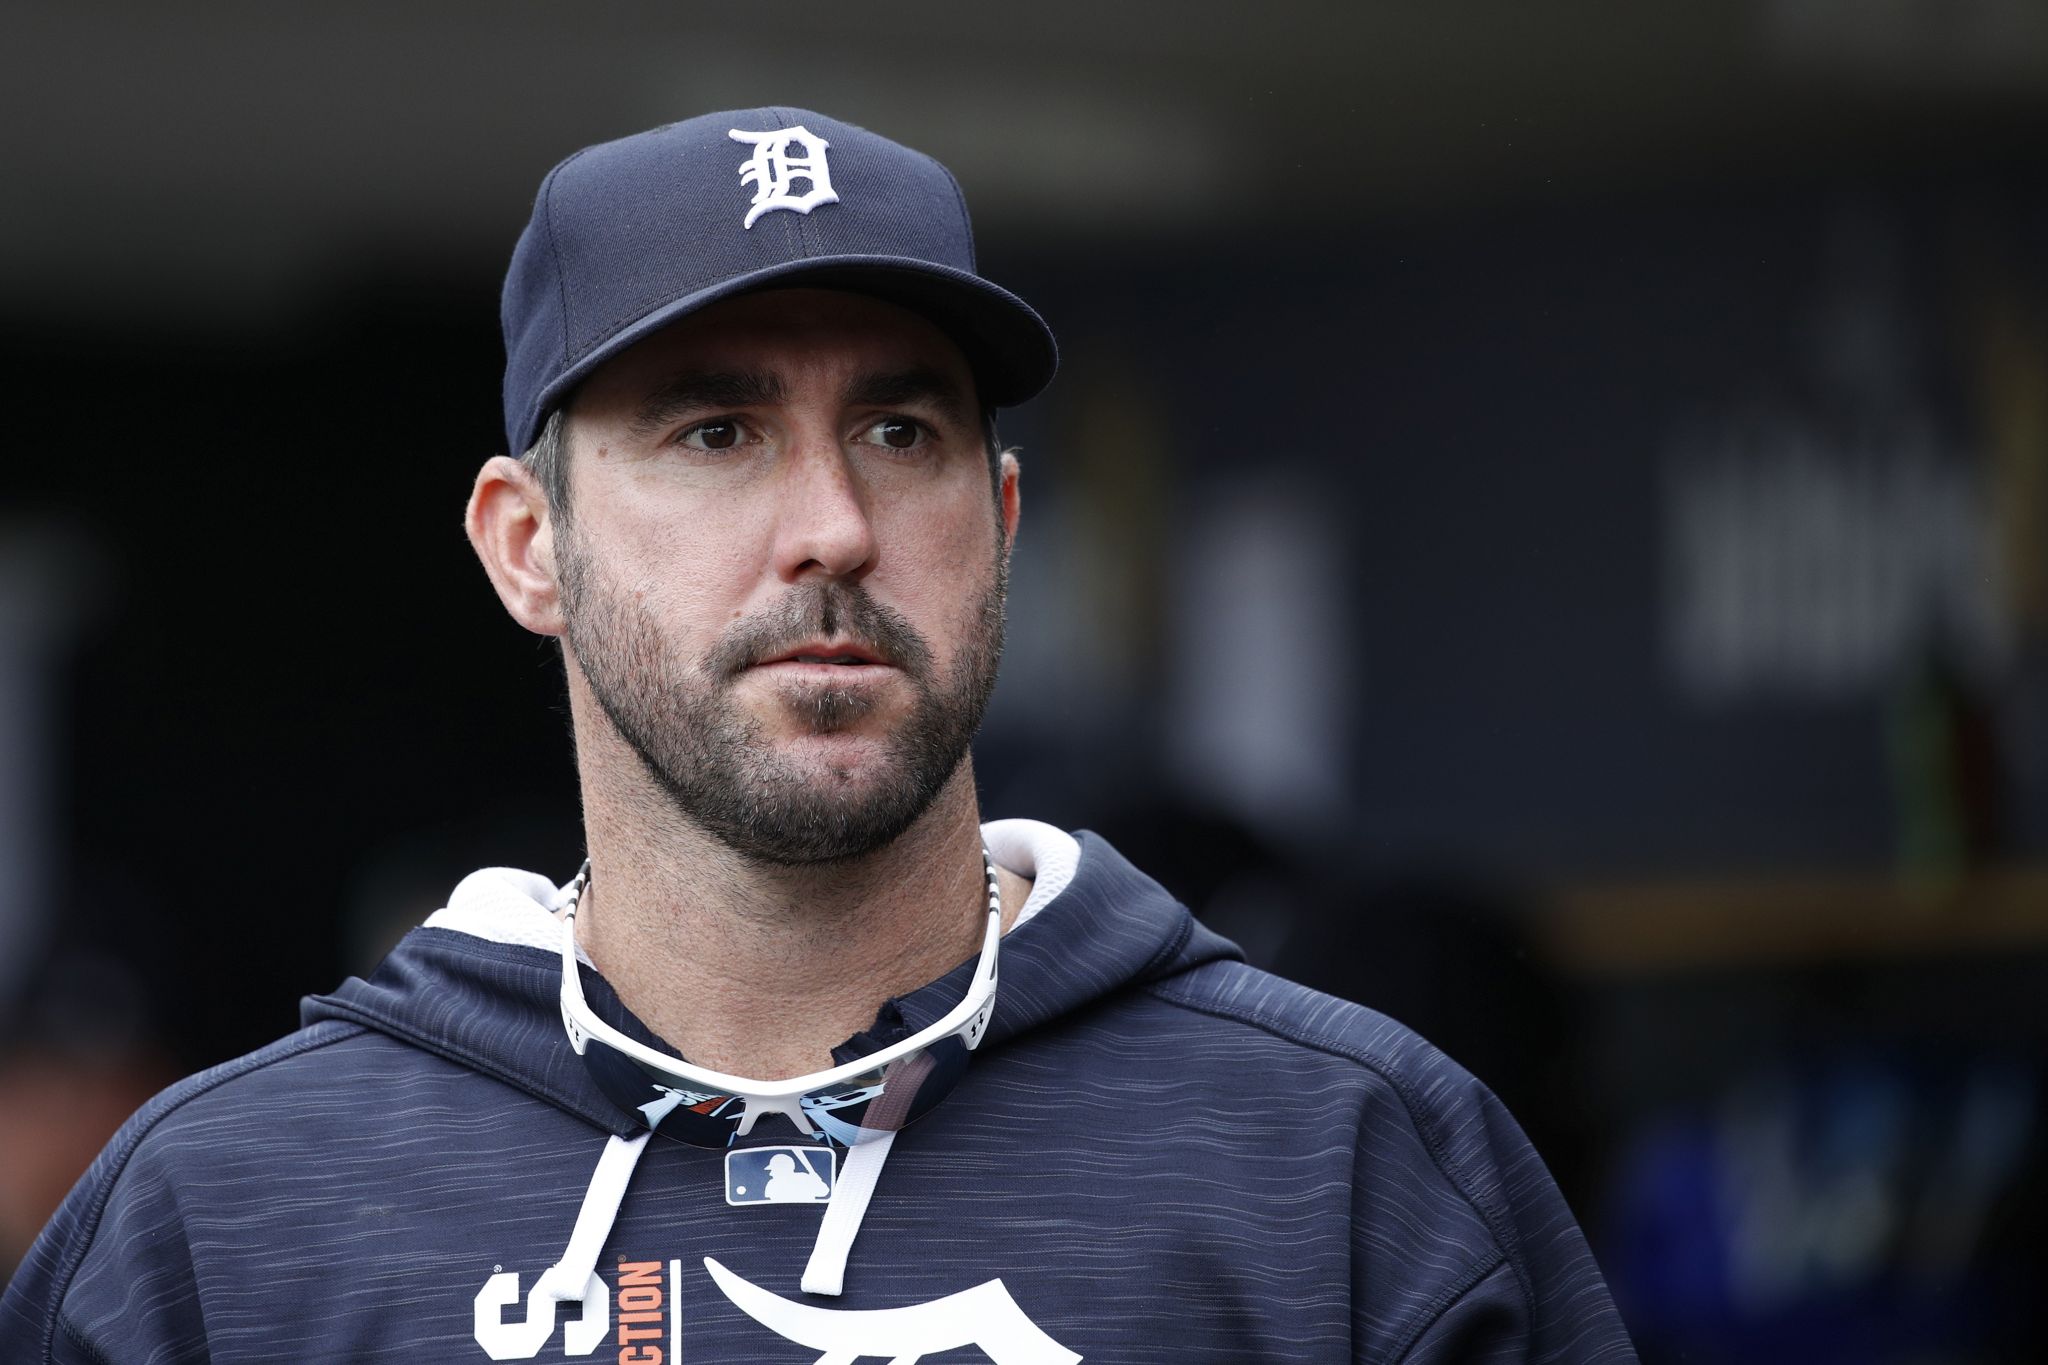 Astros: Justin Verlander could offer a Randy Johnson like impact